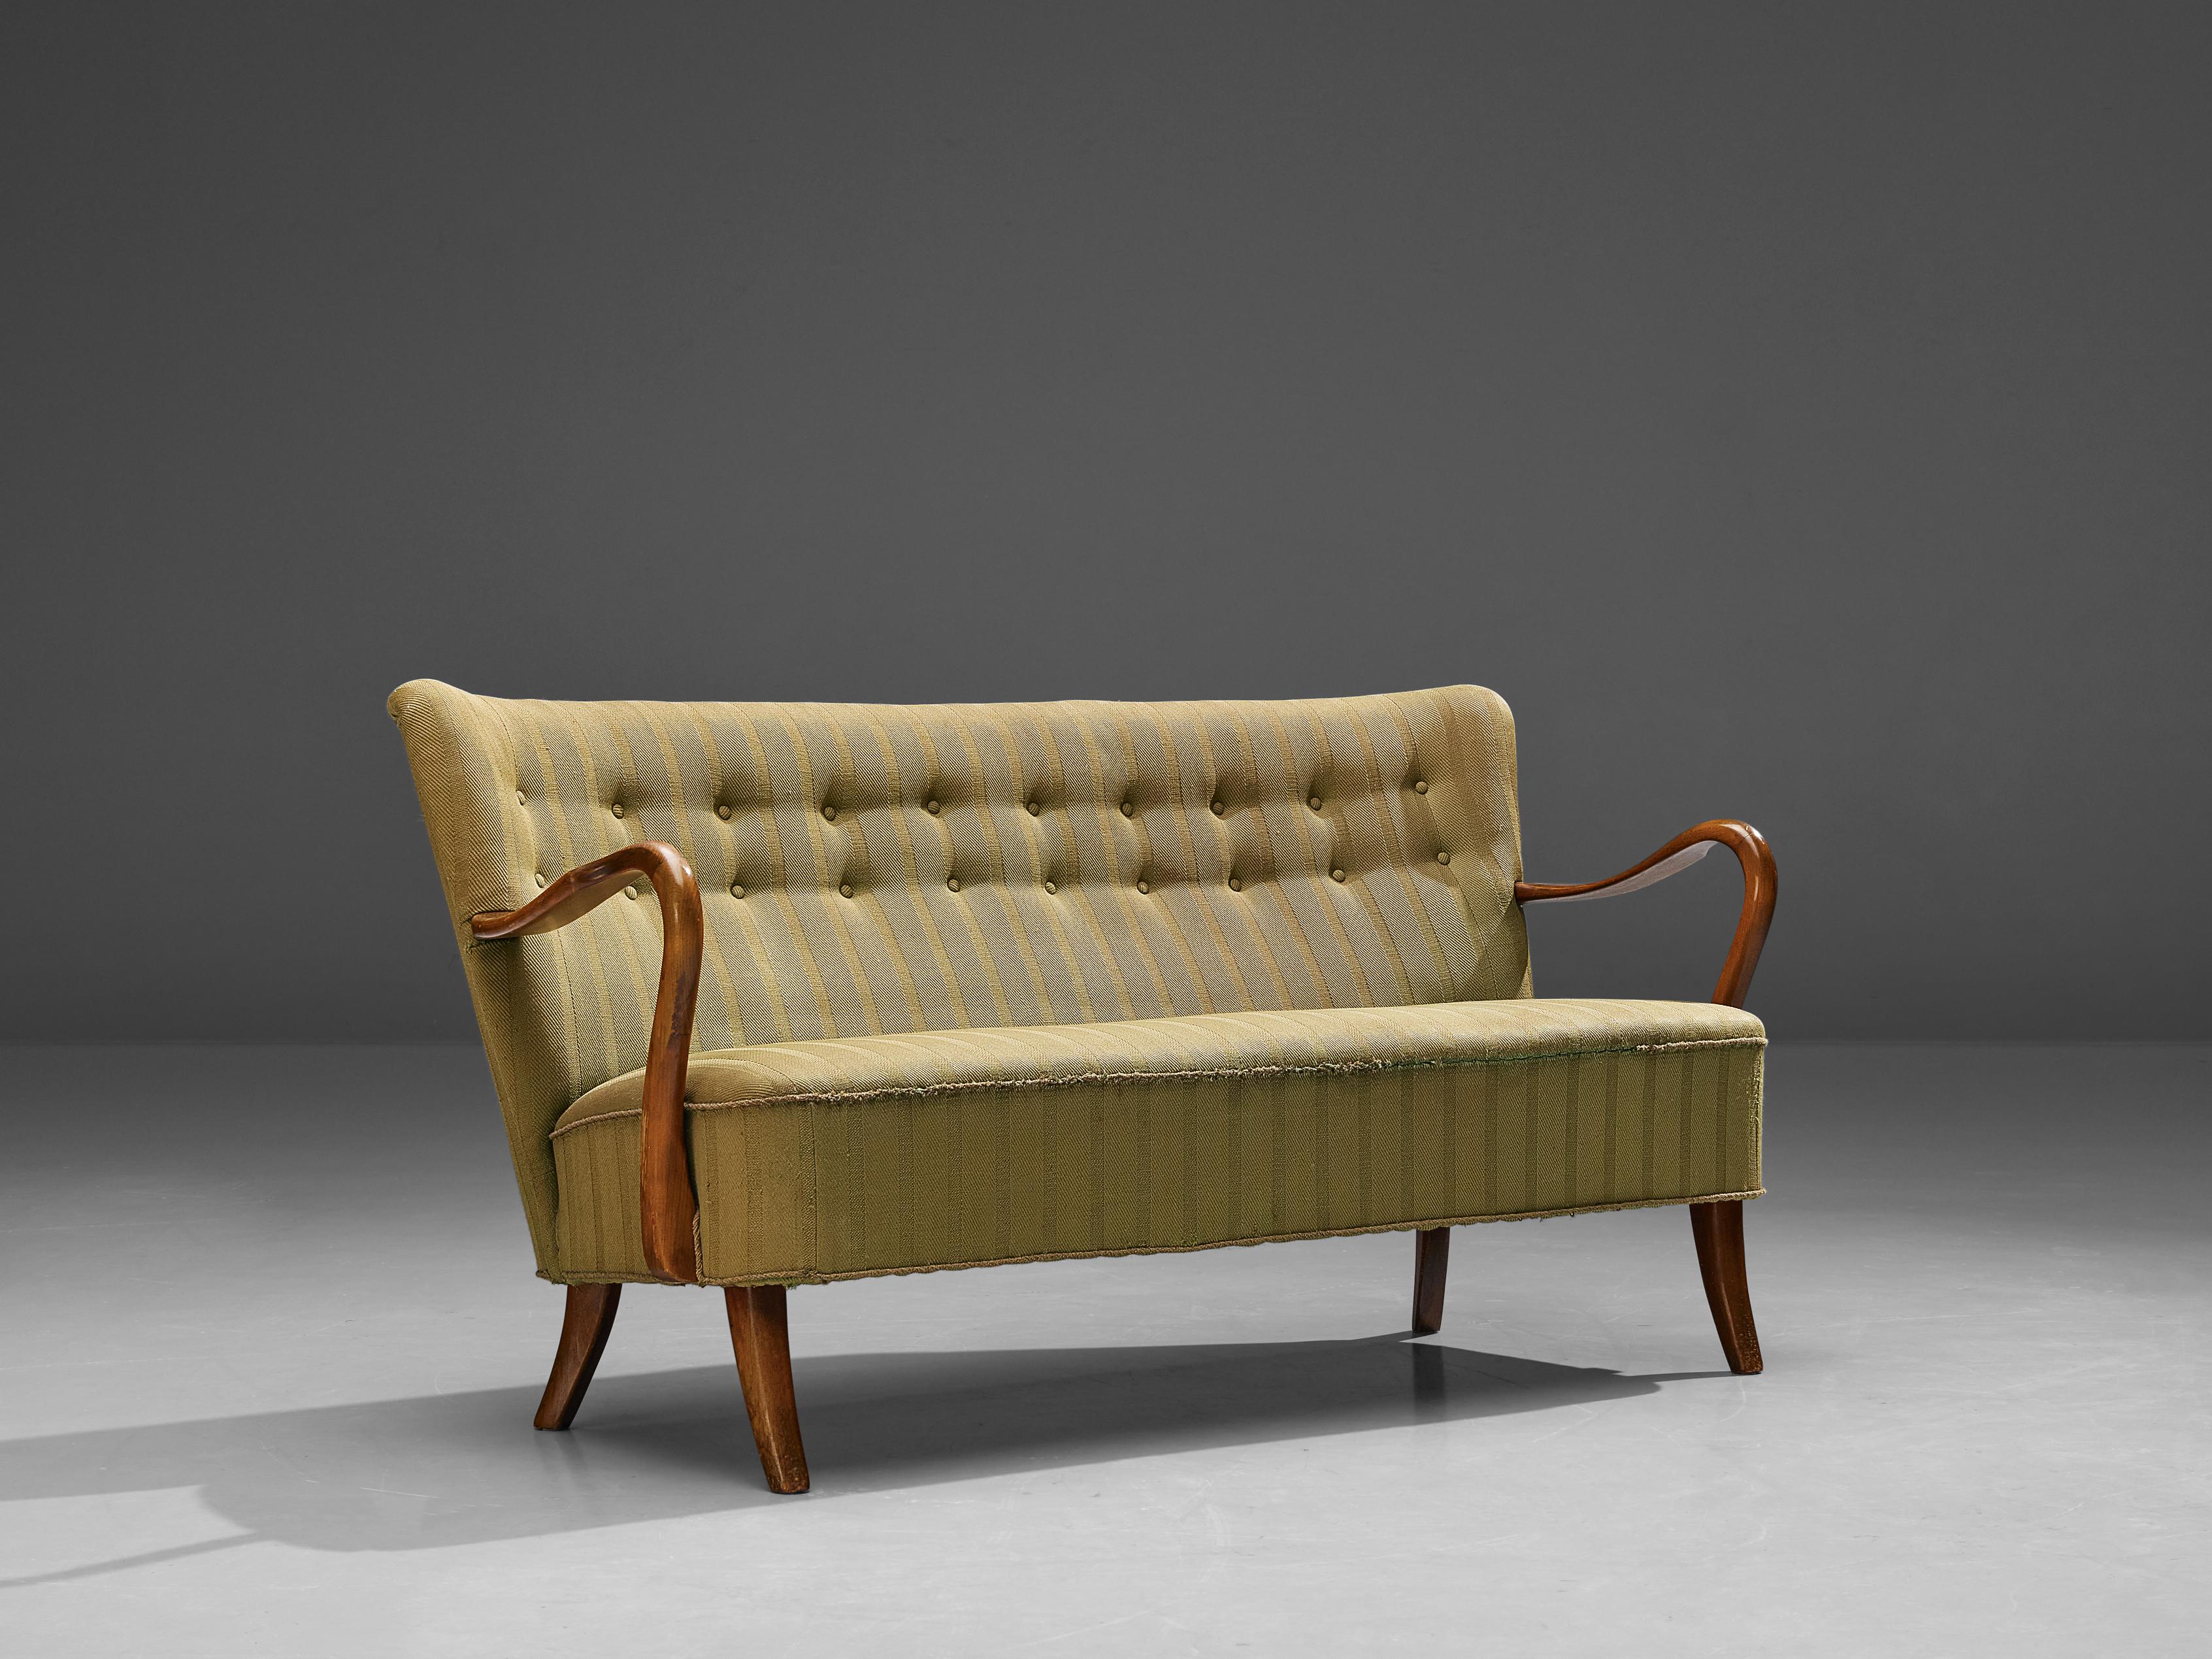 Three seater sofa, beech, fabric, Denmark, 1950s

This sofa is pure and clean in its appearance due to its lack of unnecessary decoration. In the meantime, the slightly long shaped backrest and the sleek legs, executed in beech, create a very